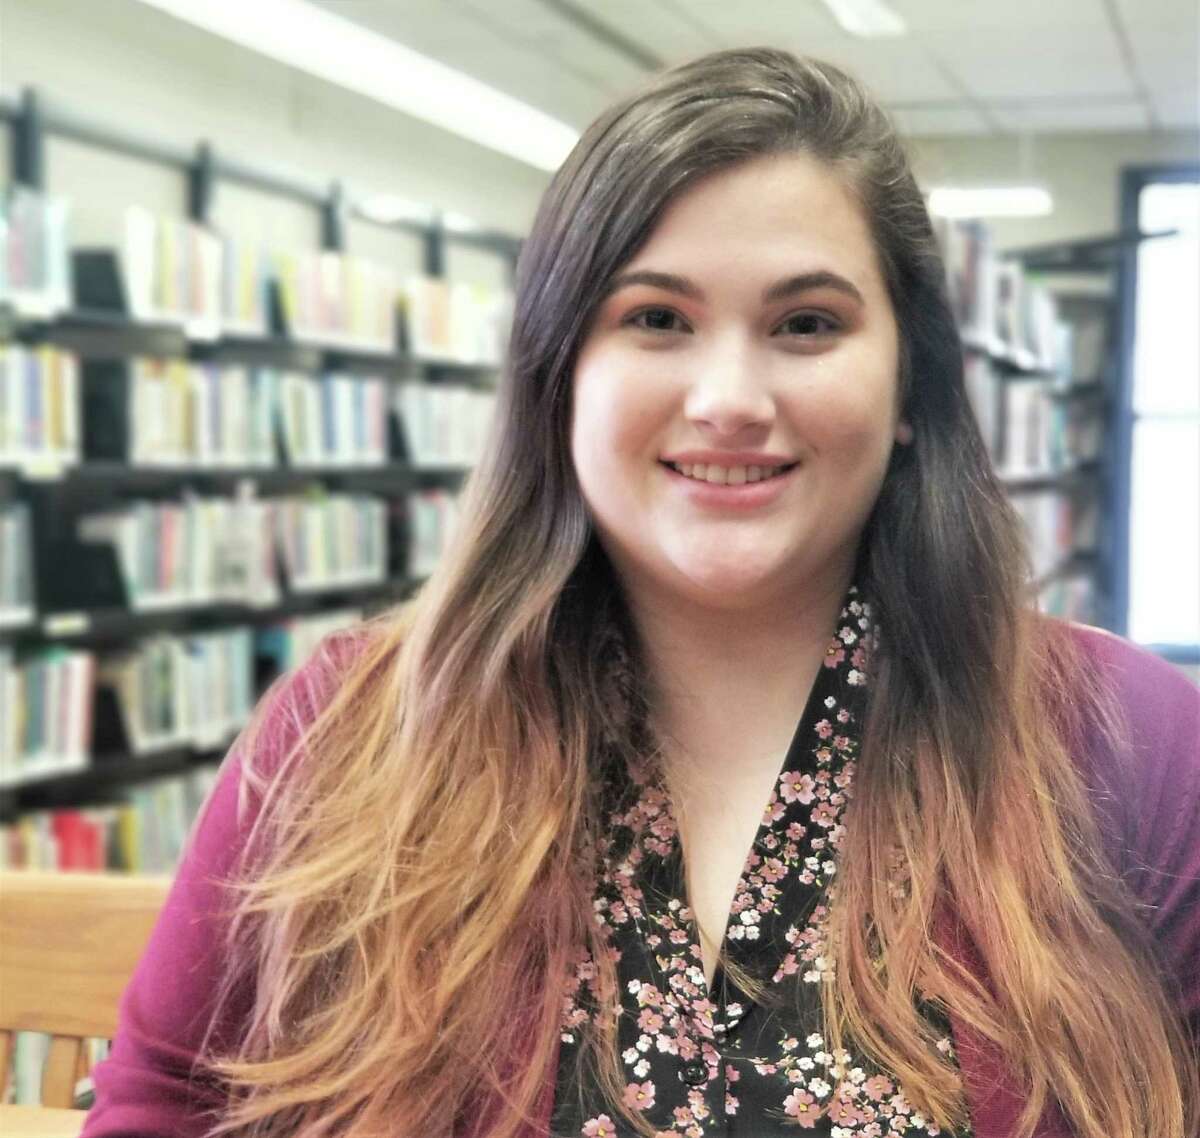 The East Hampton Public Library is welcoming Stephanie Smith as the new adult / young adult librarian.